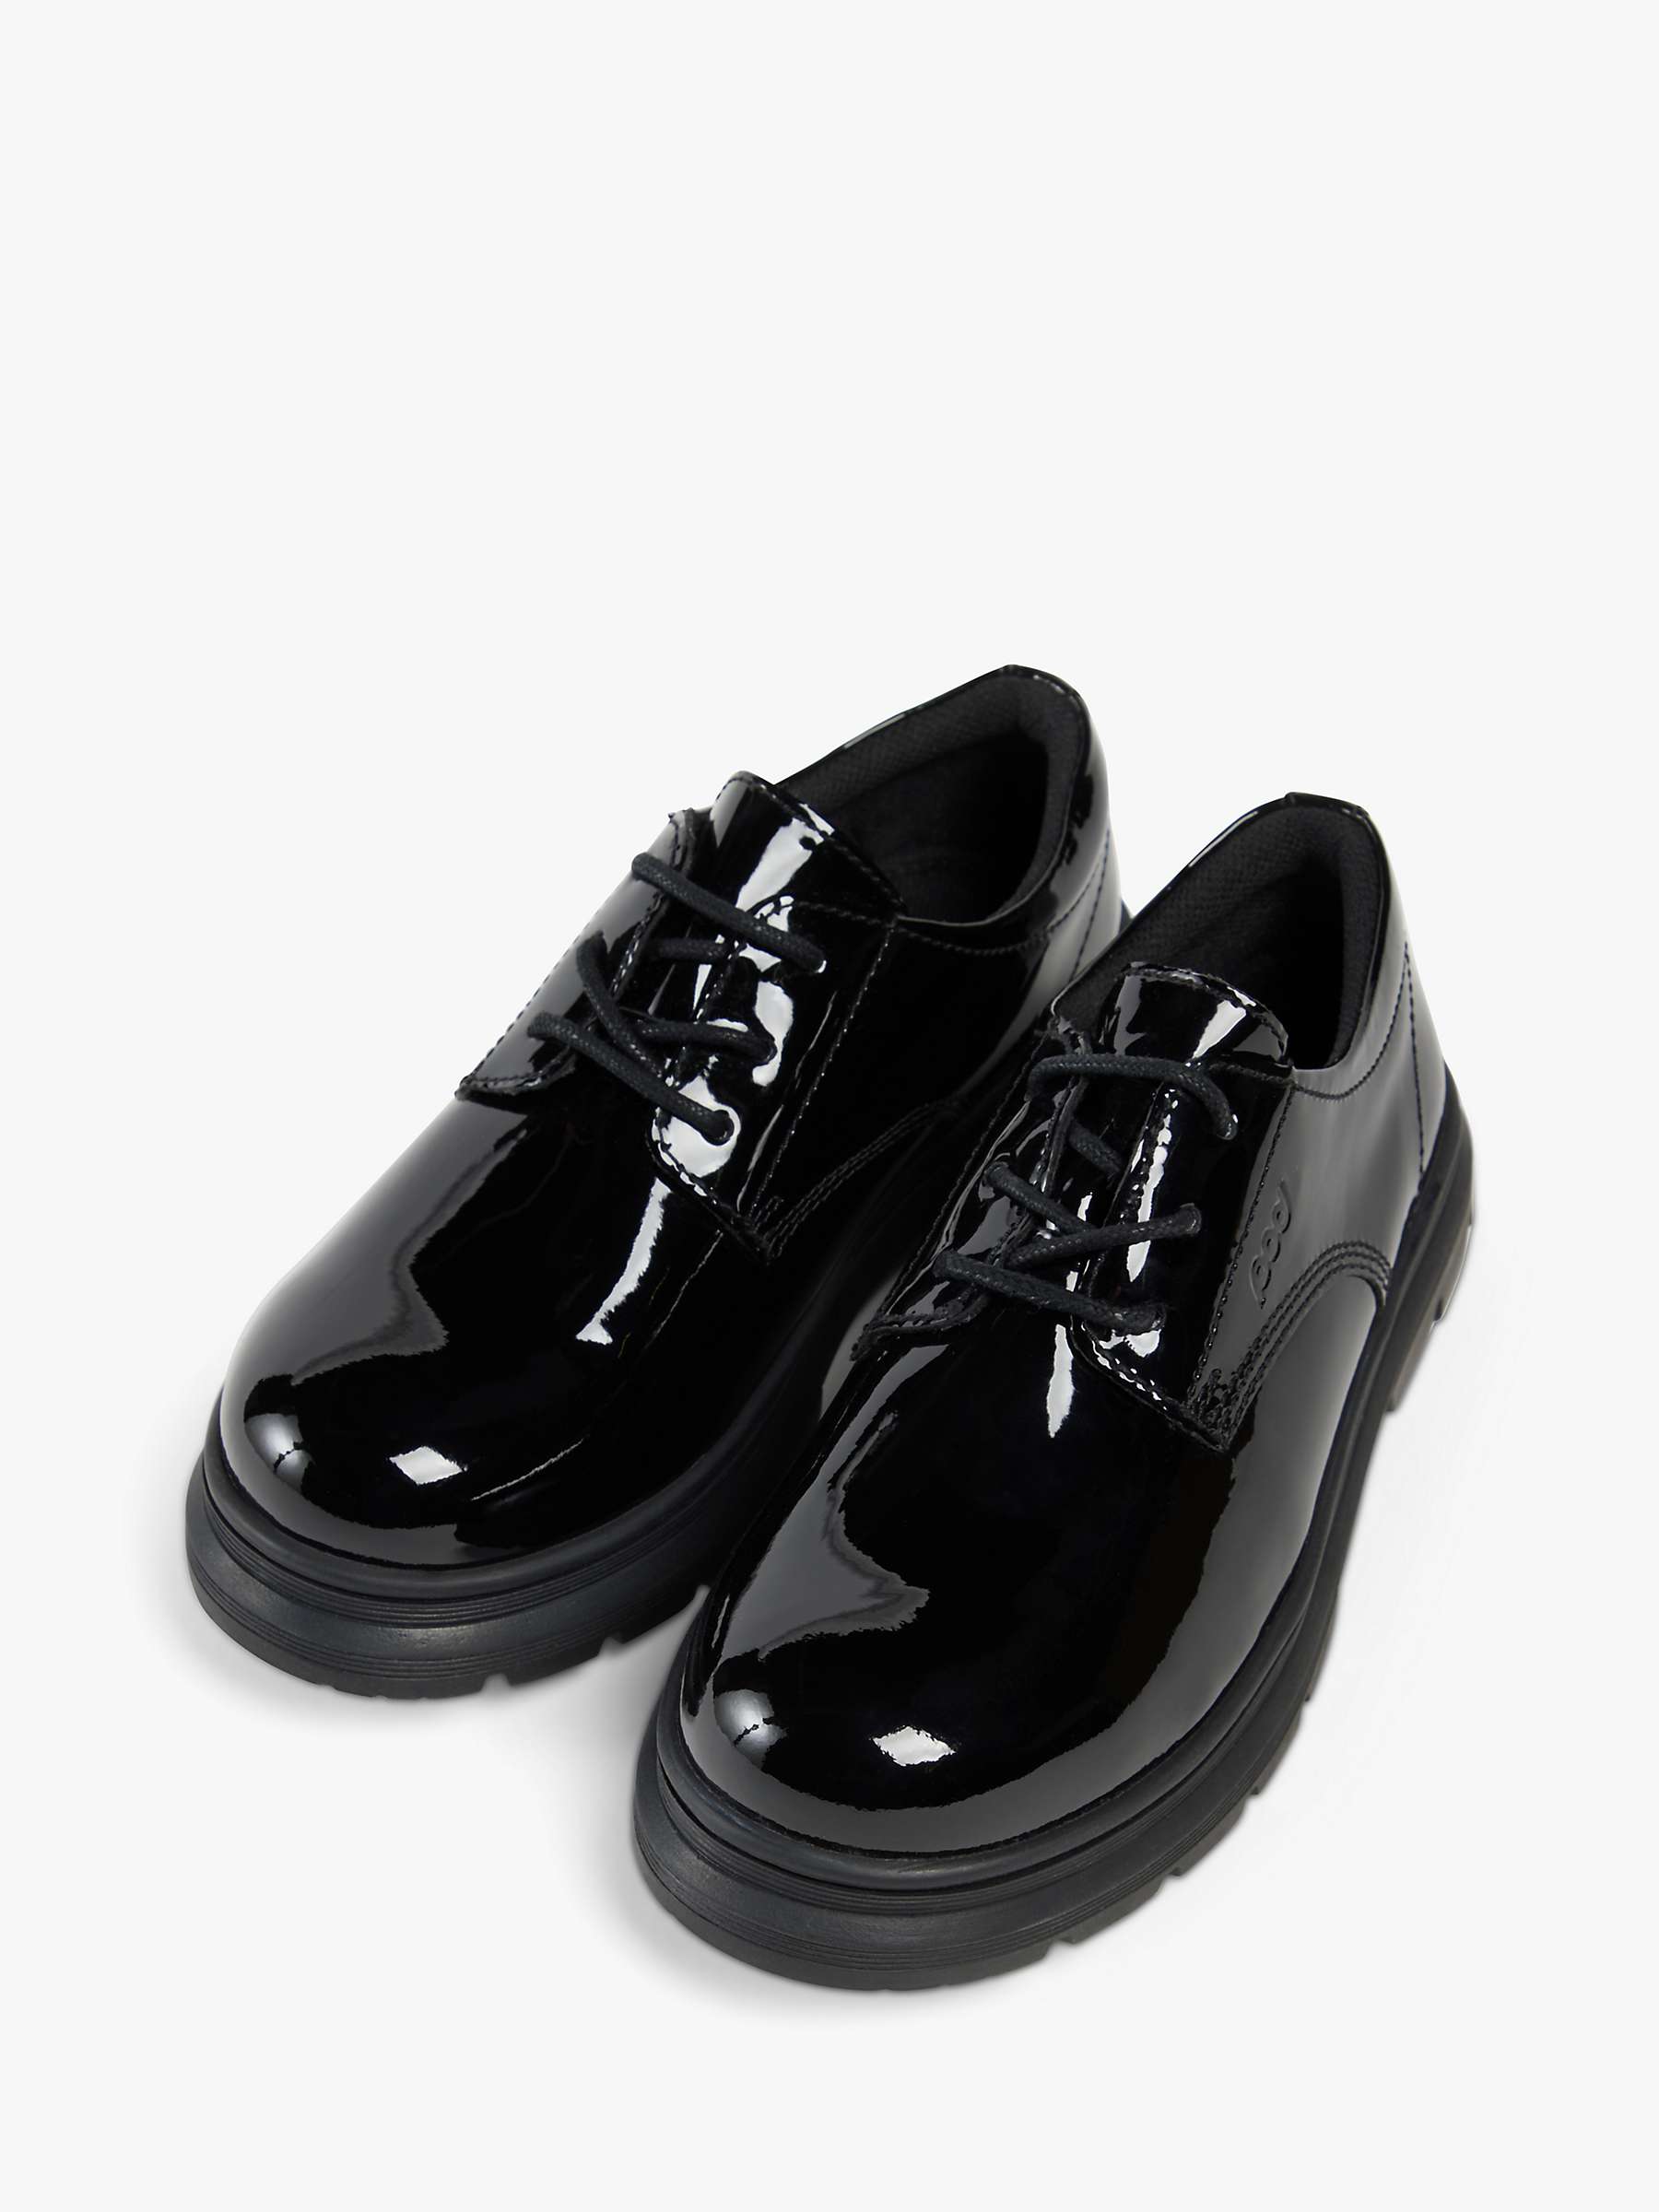 Buy Pod Kids' Irene Patent Leather Lace Up Shoes, Black Online at johnlewis.com